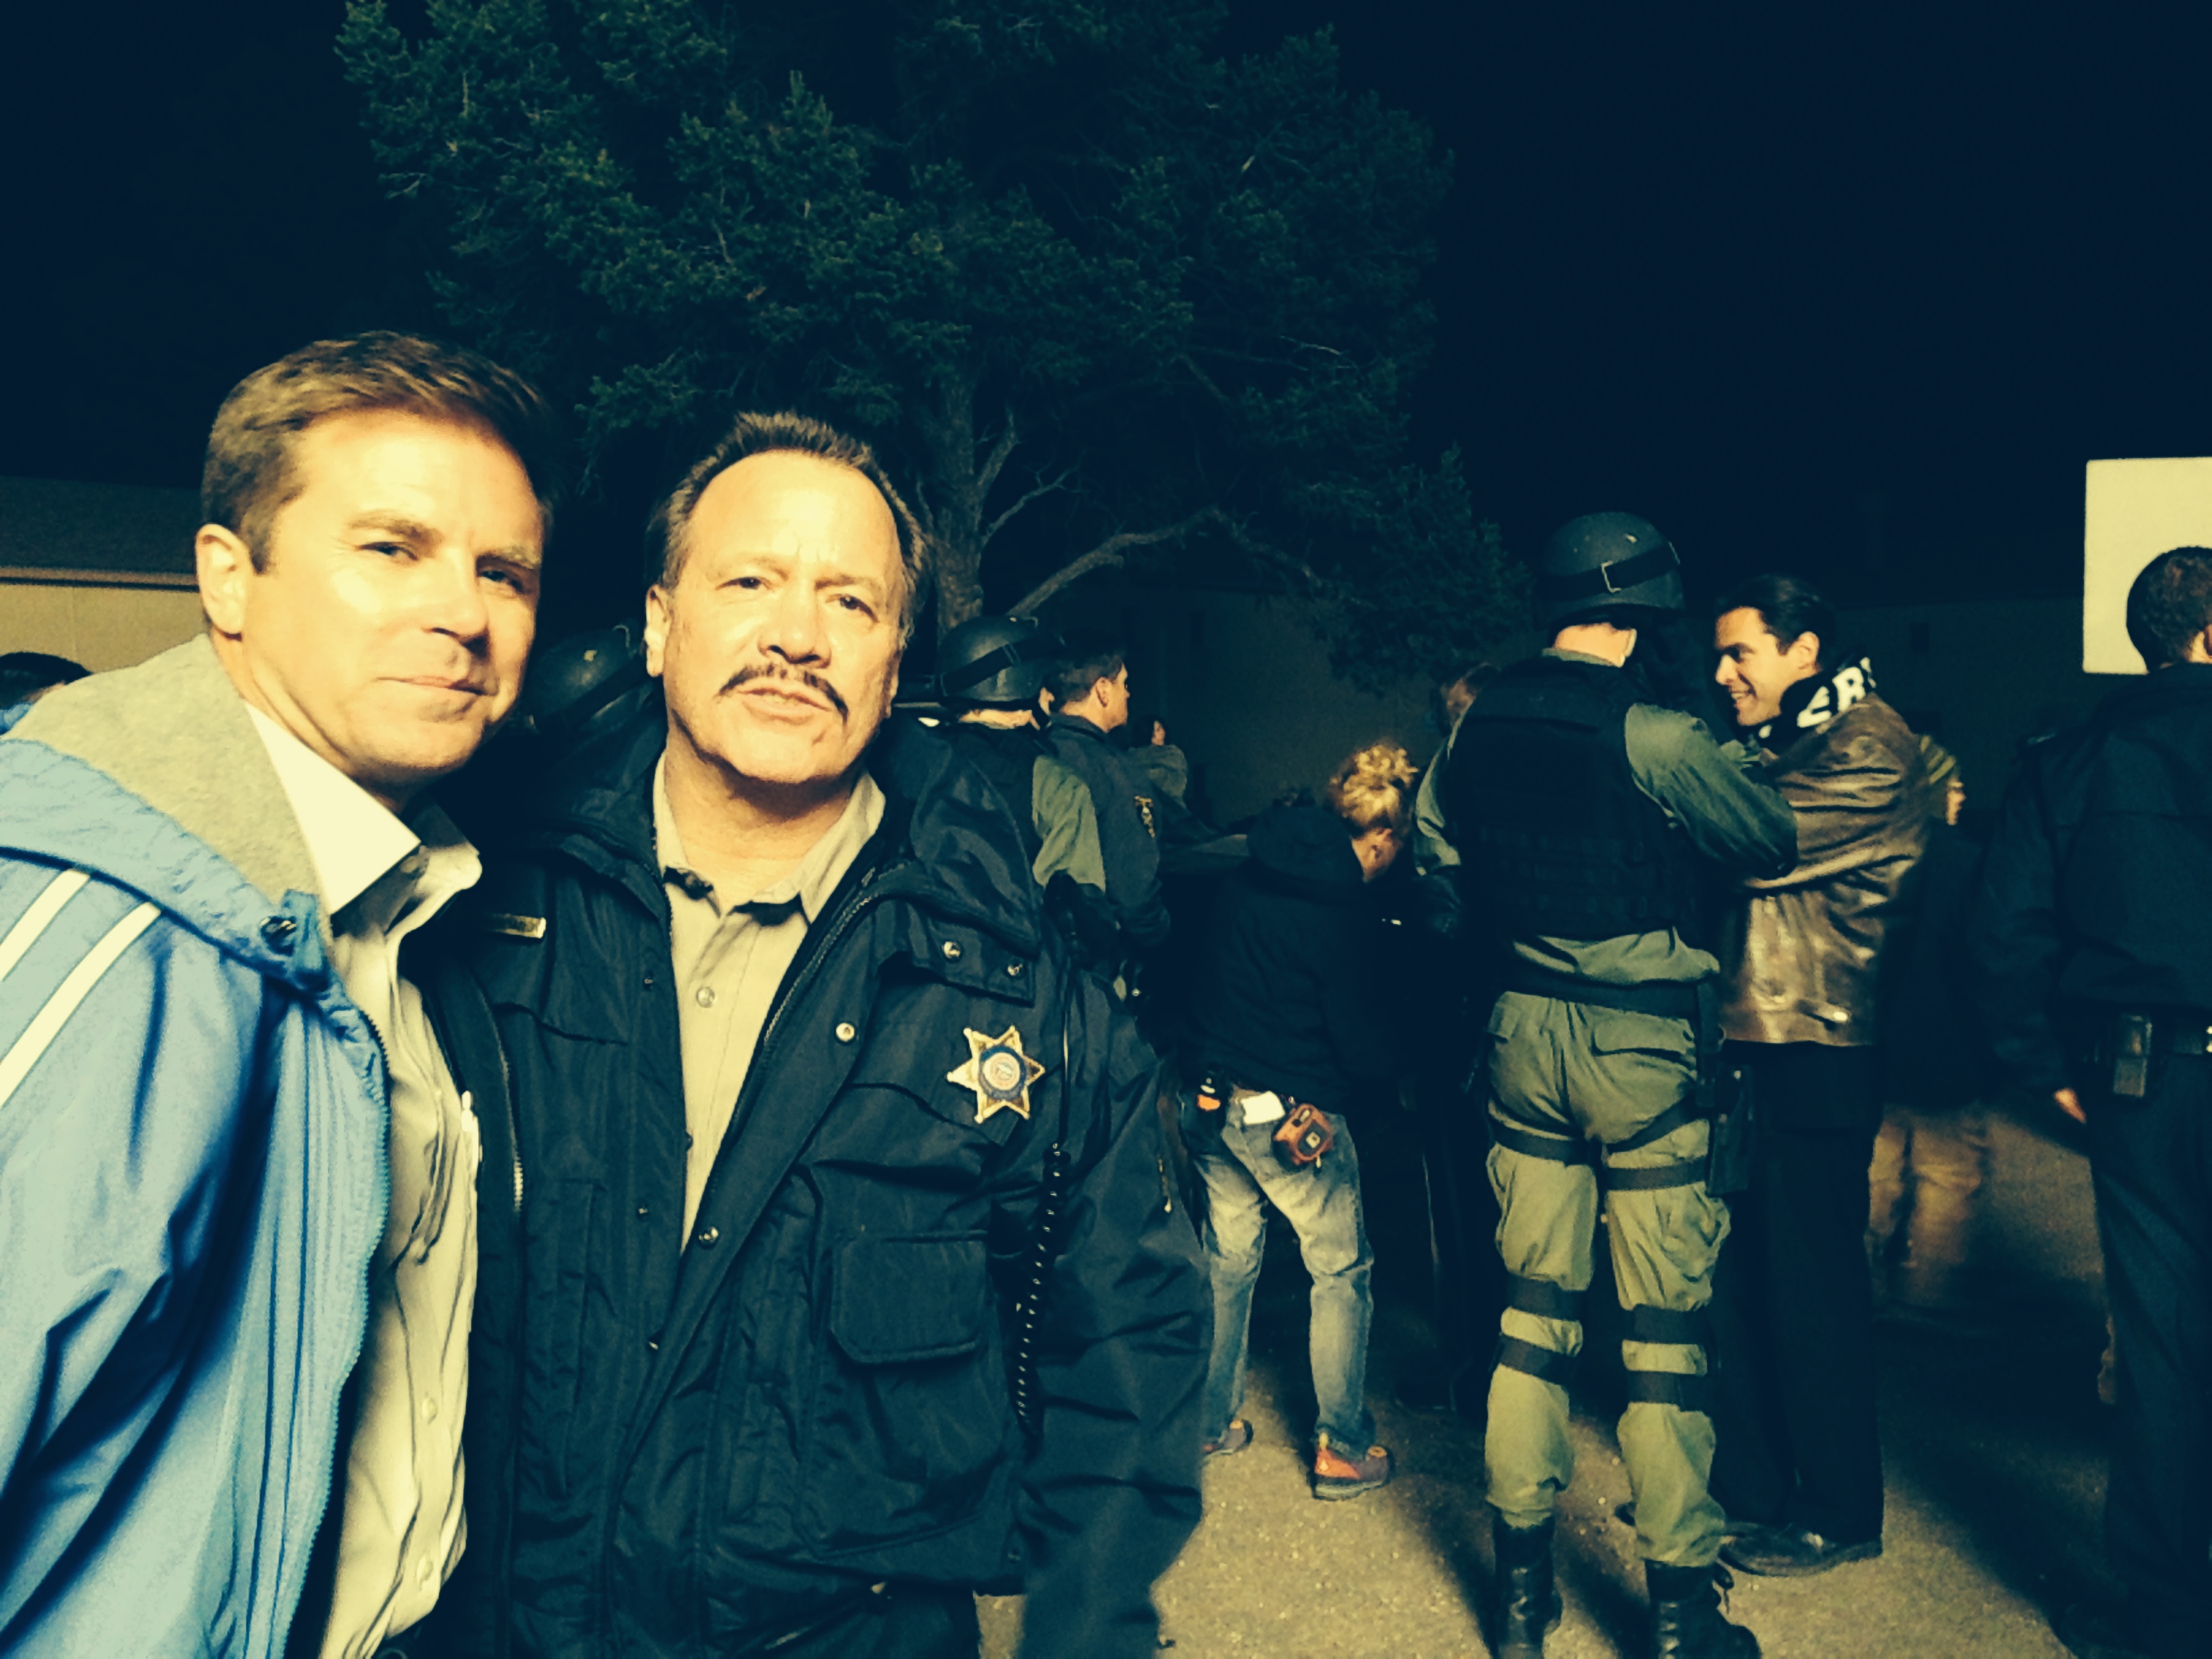 JD and Aaron McPherson on the set of Jubilee.